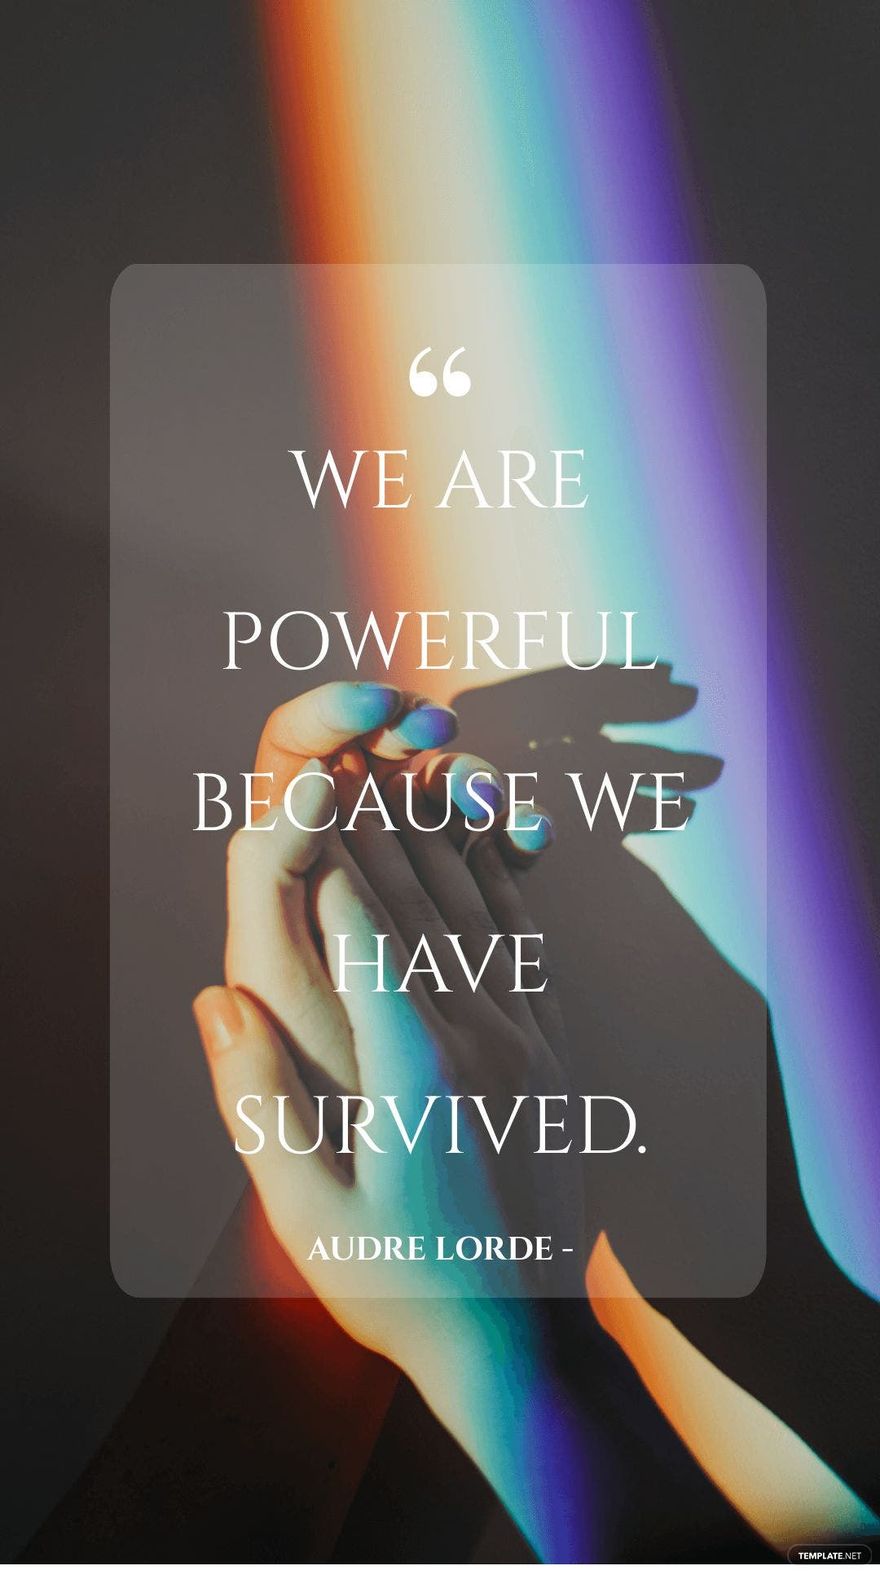 Free Audre Lorde - We are powerful because we have survived. in JPG